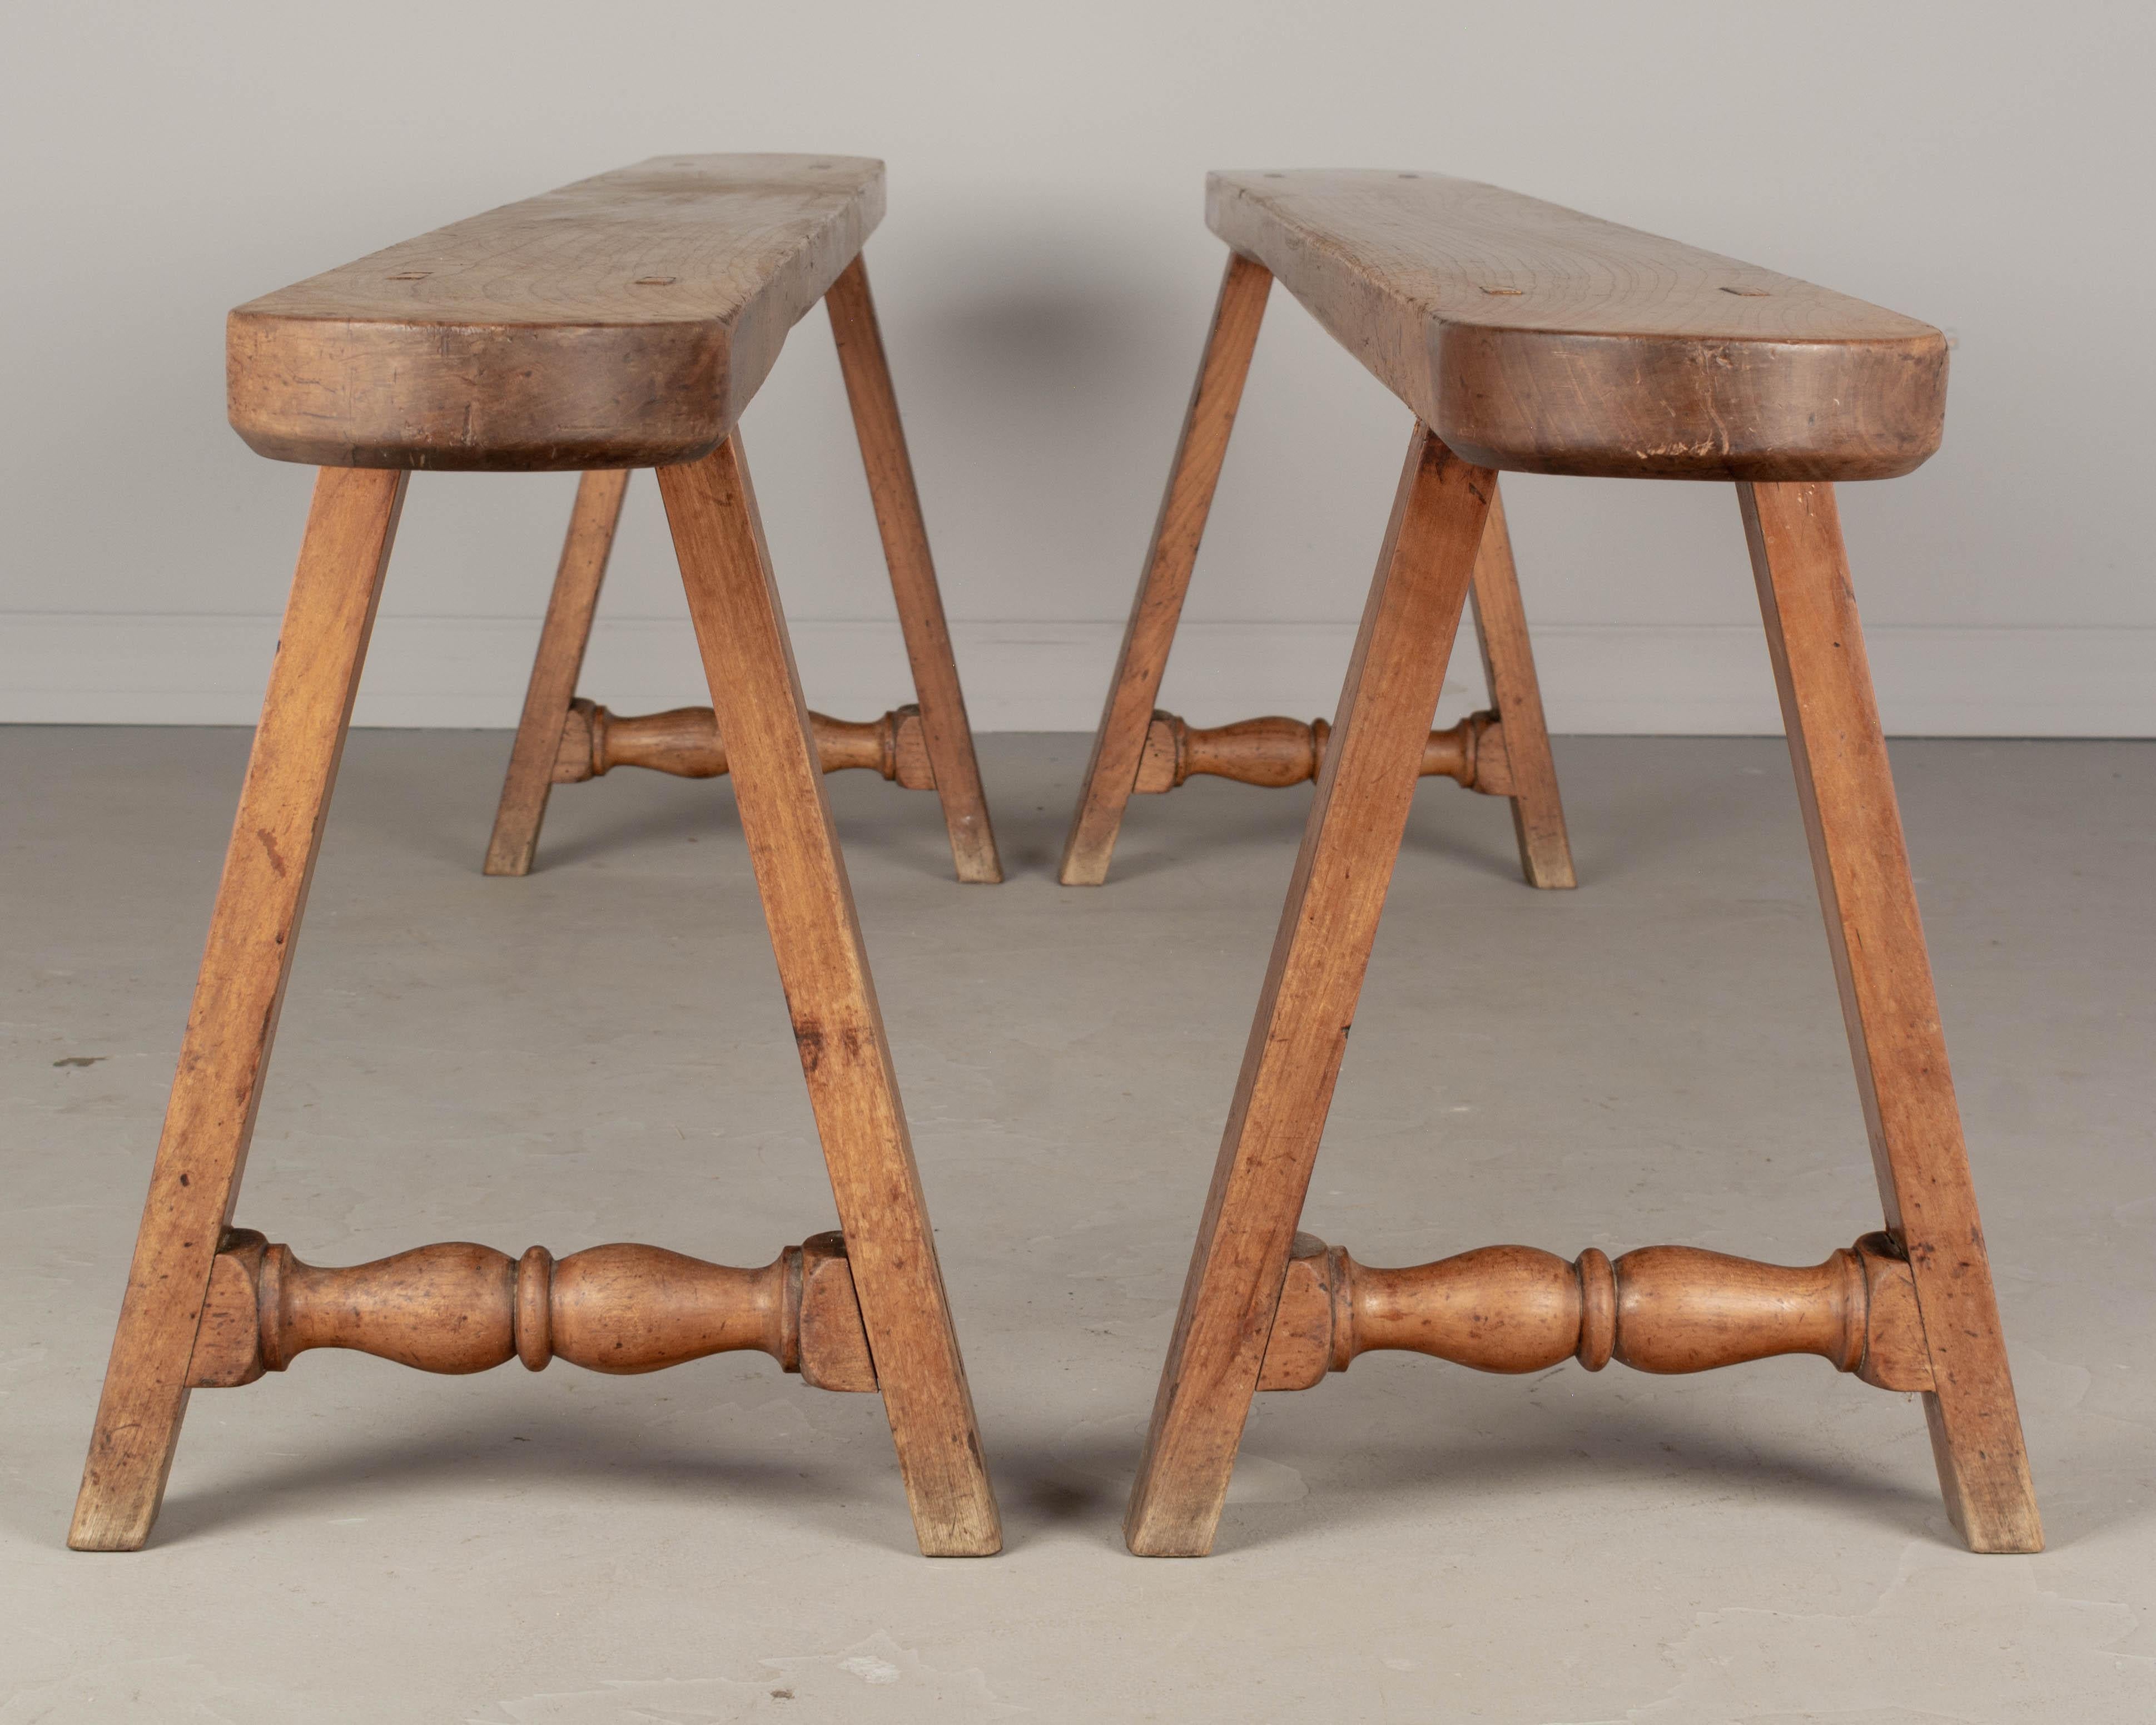 20th Century Country French Cherry Wood Farm Table Benches, a Pair For Sale